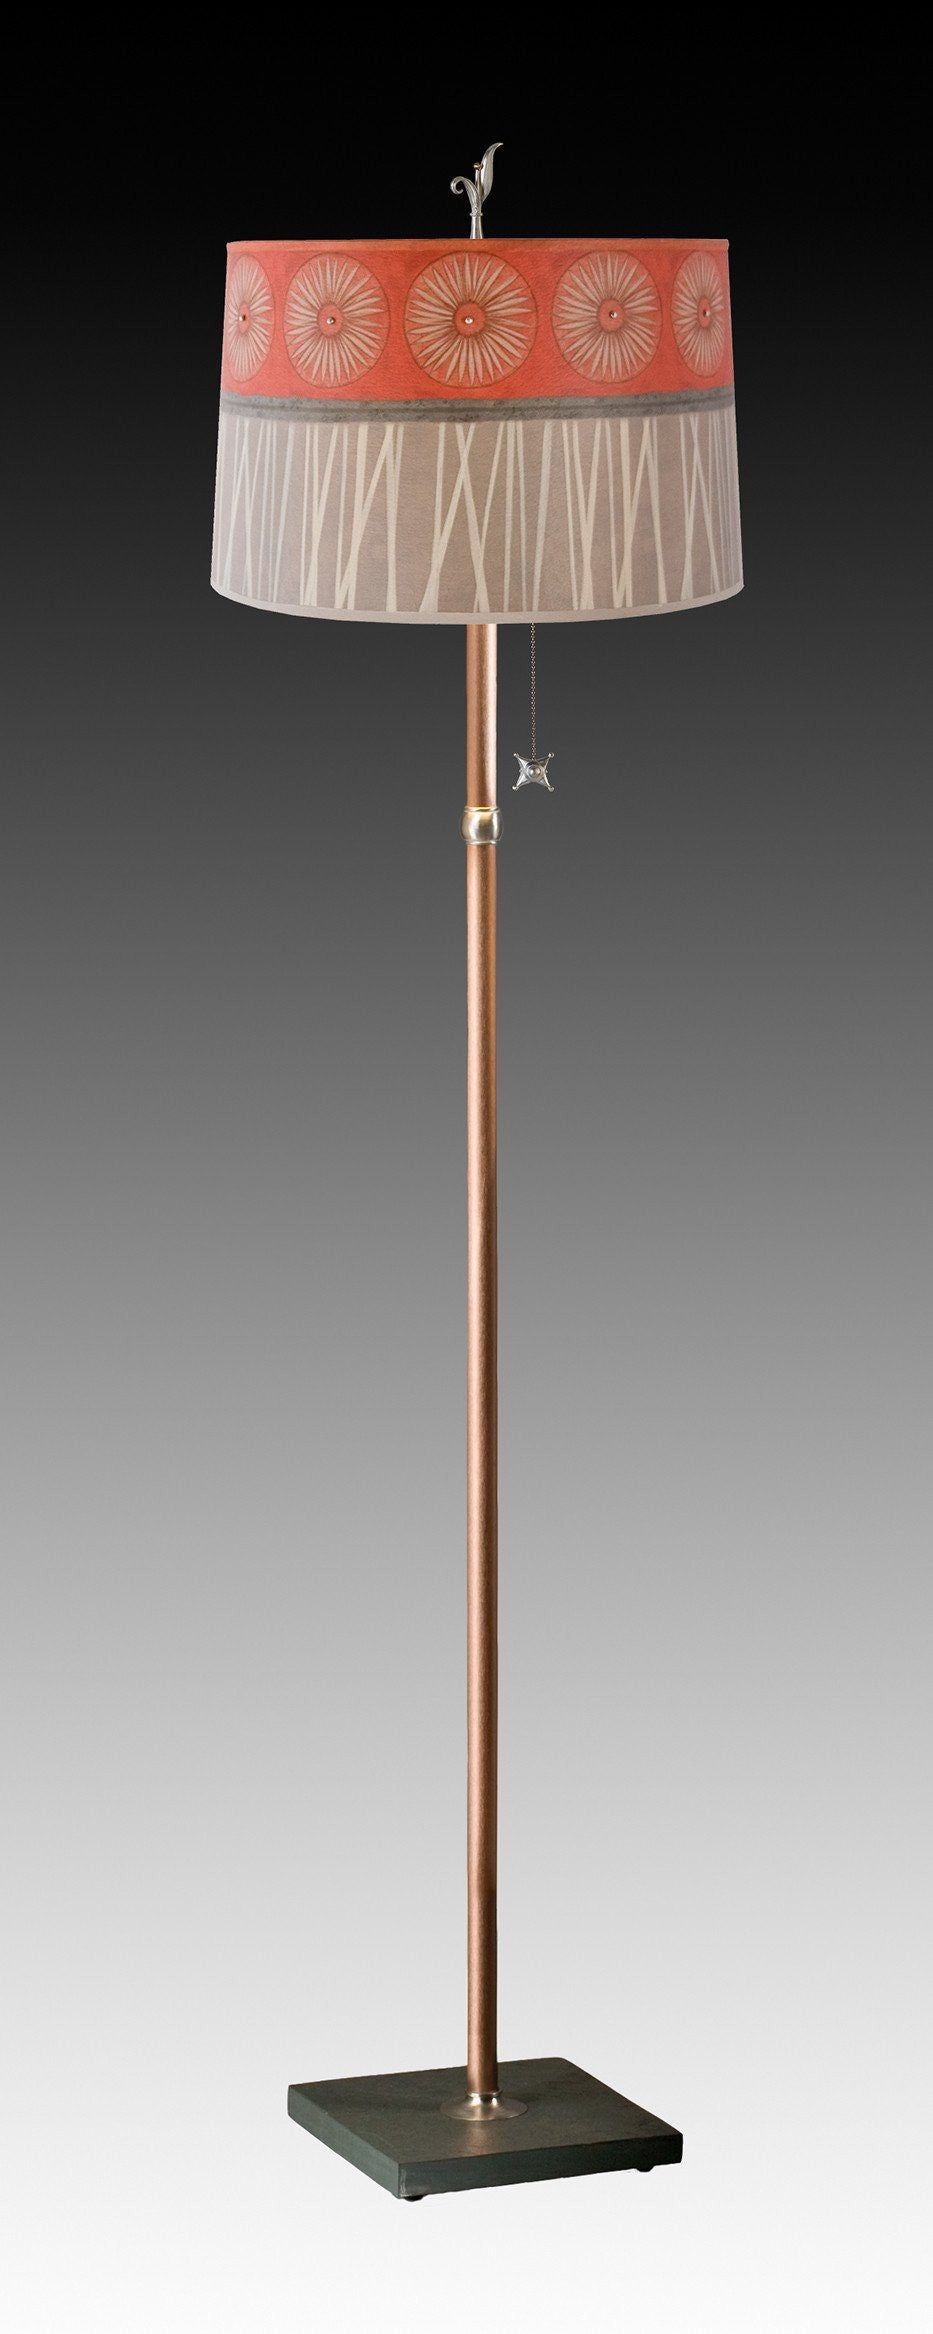 Copper Floor Lamp with Large Drum Shade in Tang